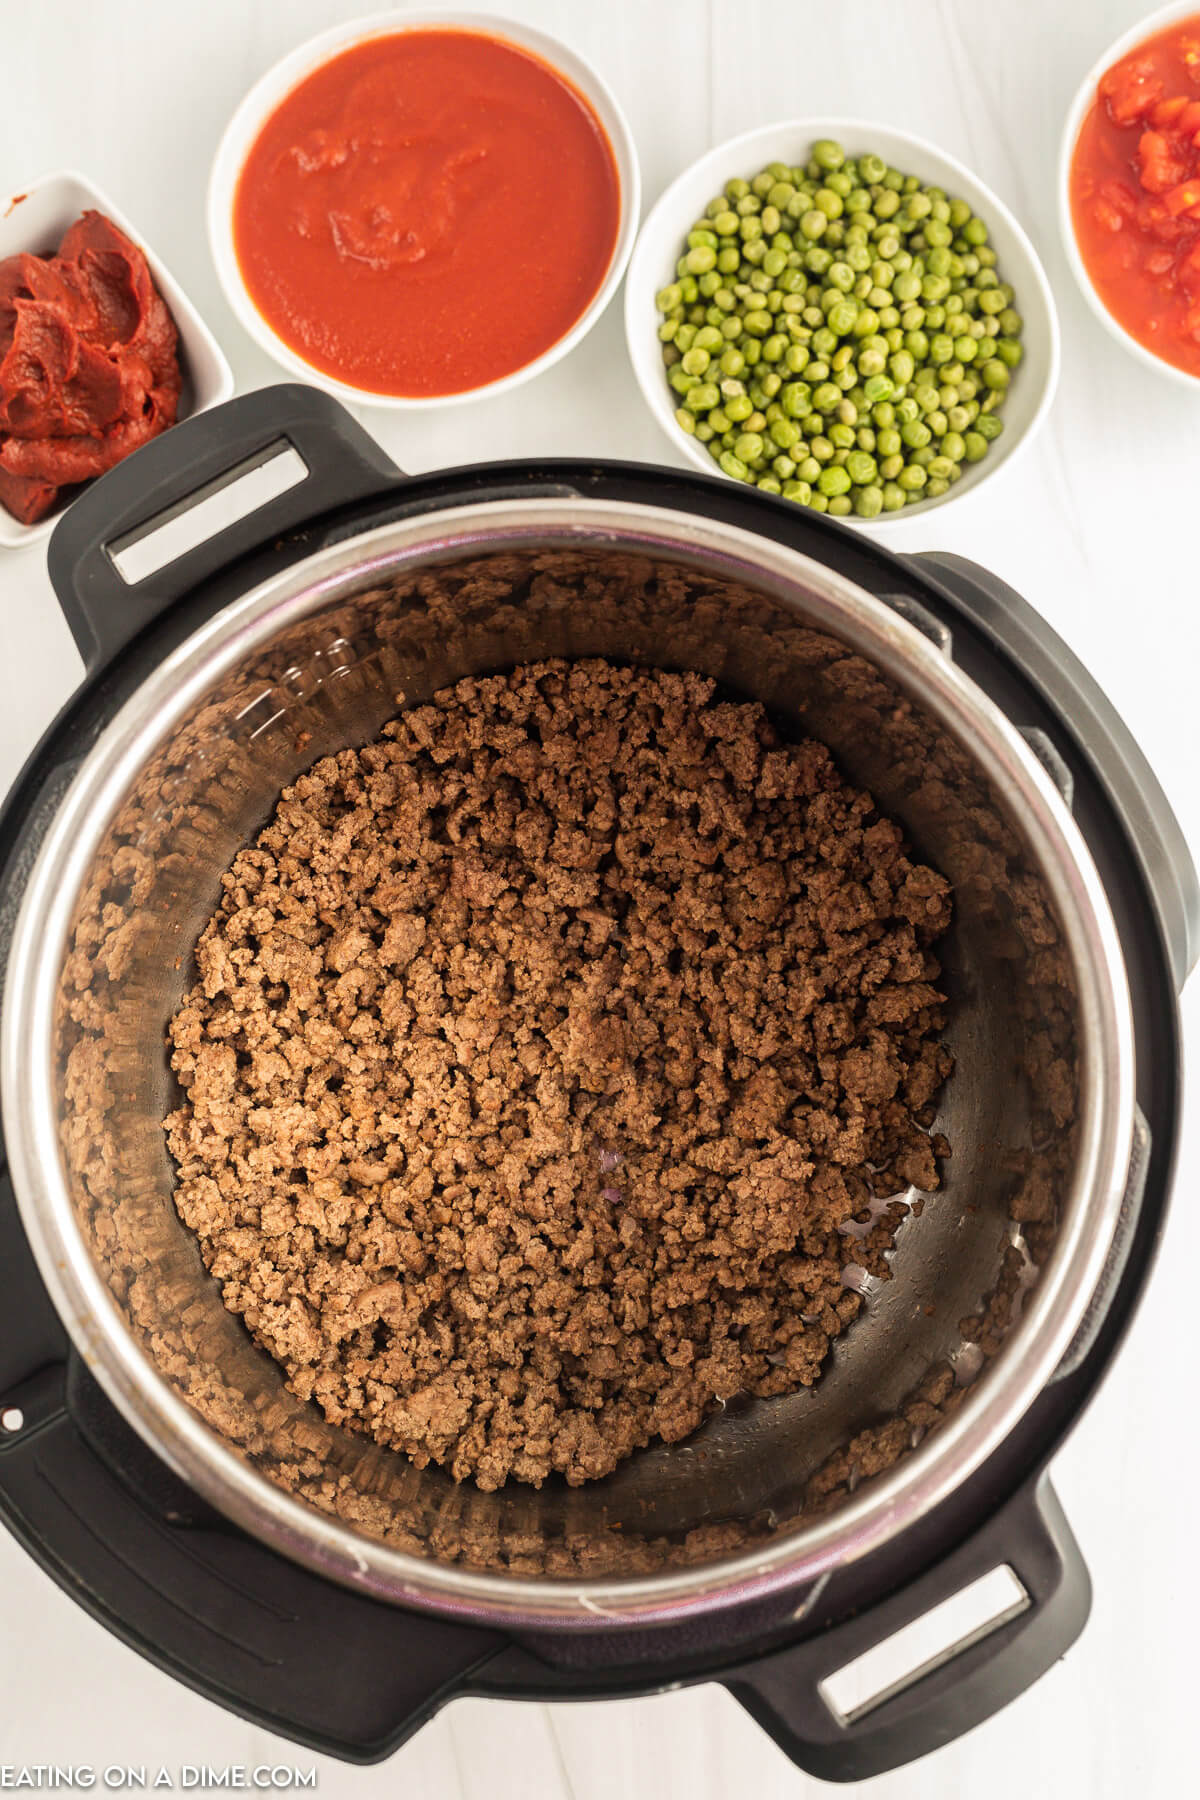 Cooking ground beef in the instant pot